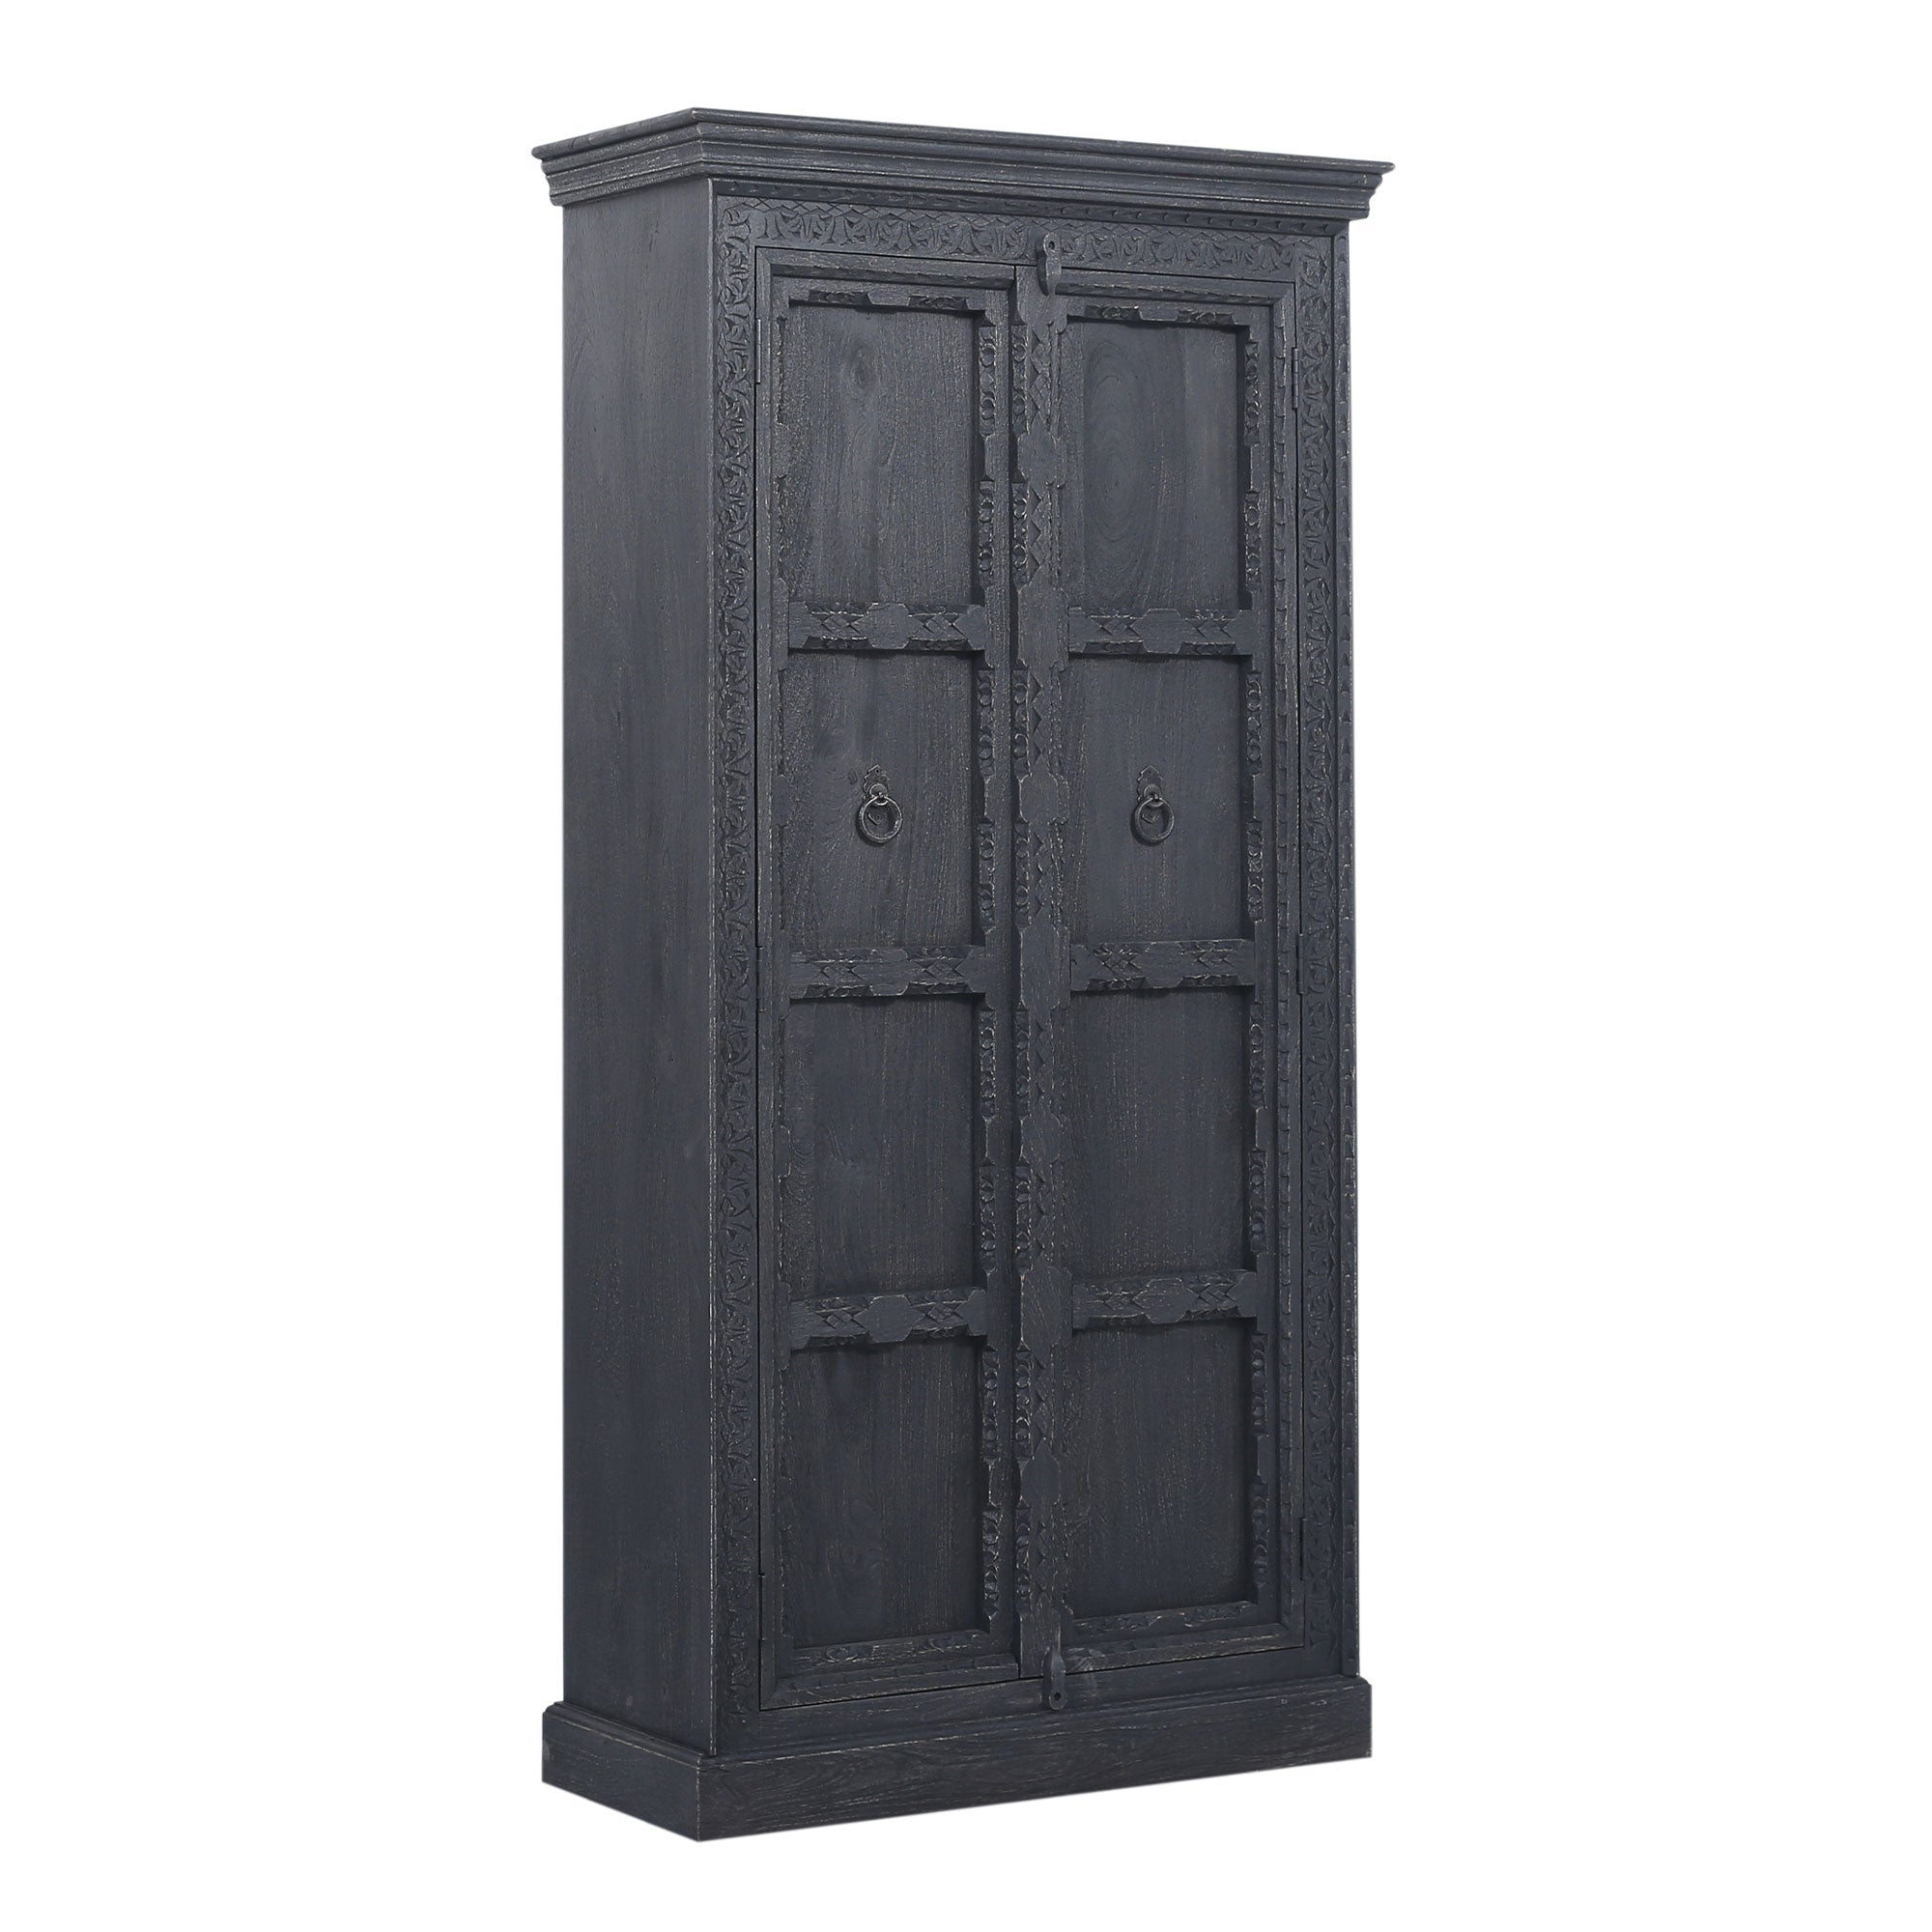 Mahala Nomad Wooden Cabinet in Distressed Black Finish in Cabinets by VMInnovations